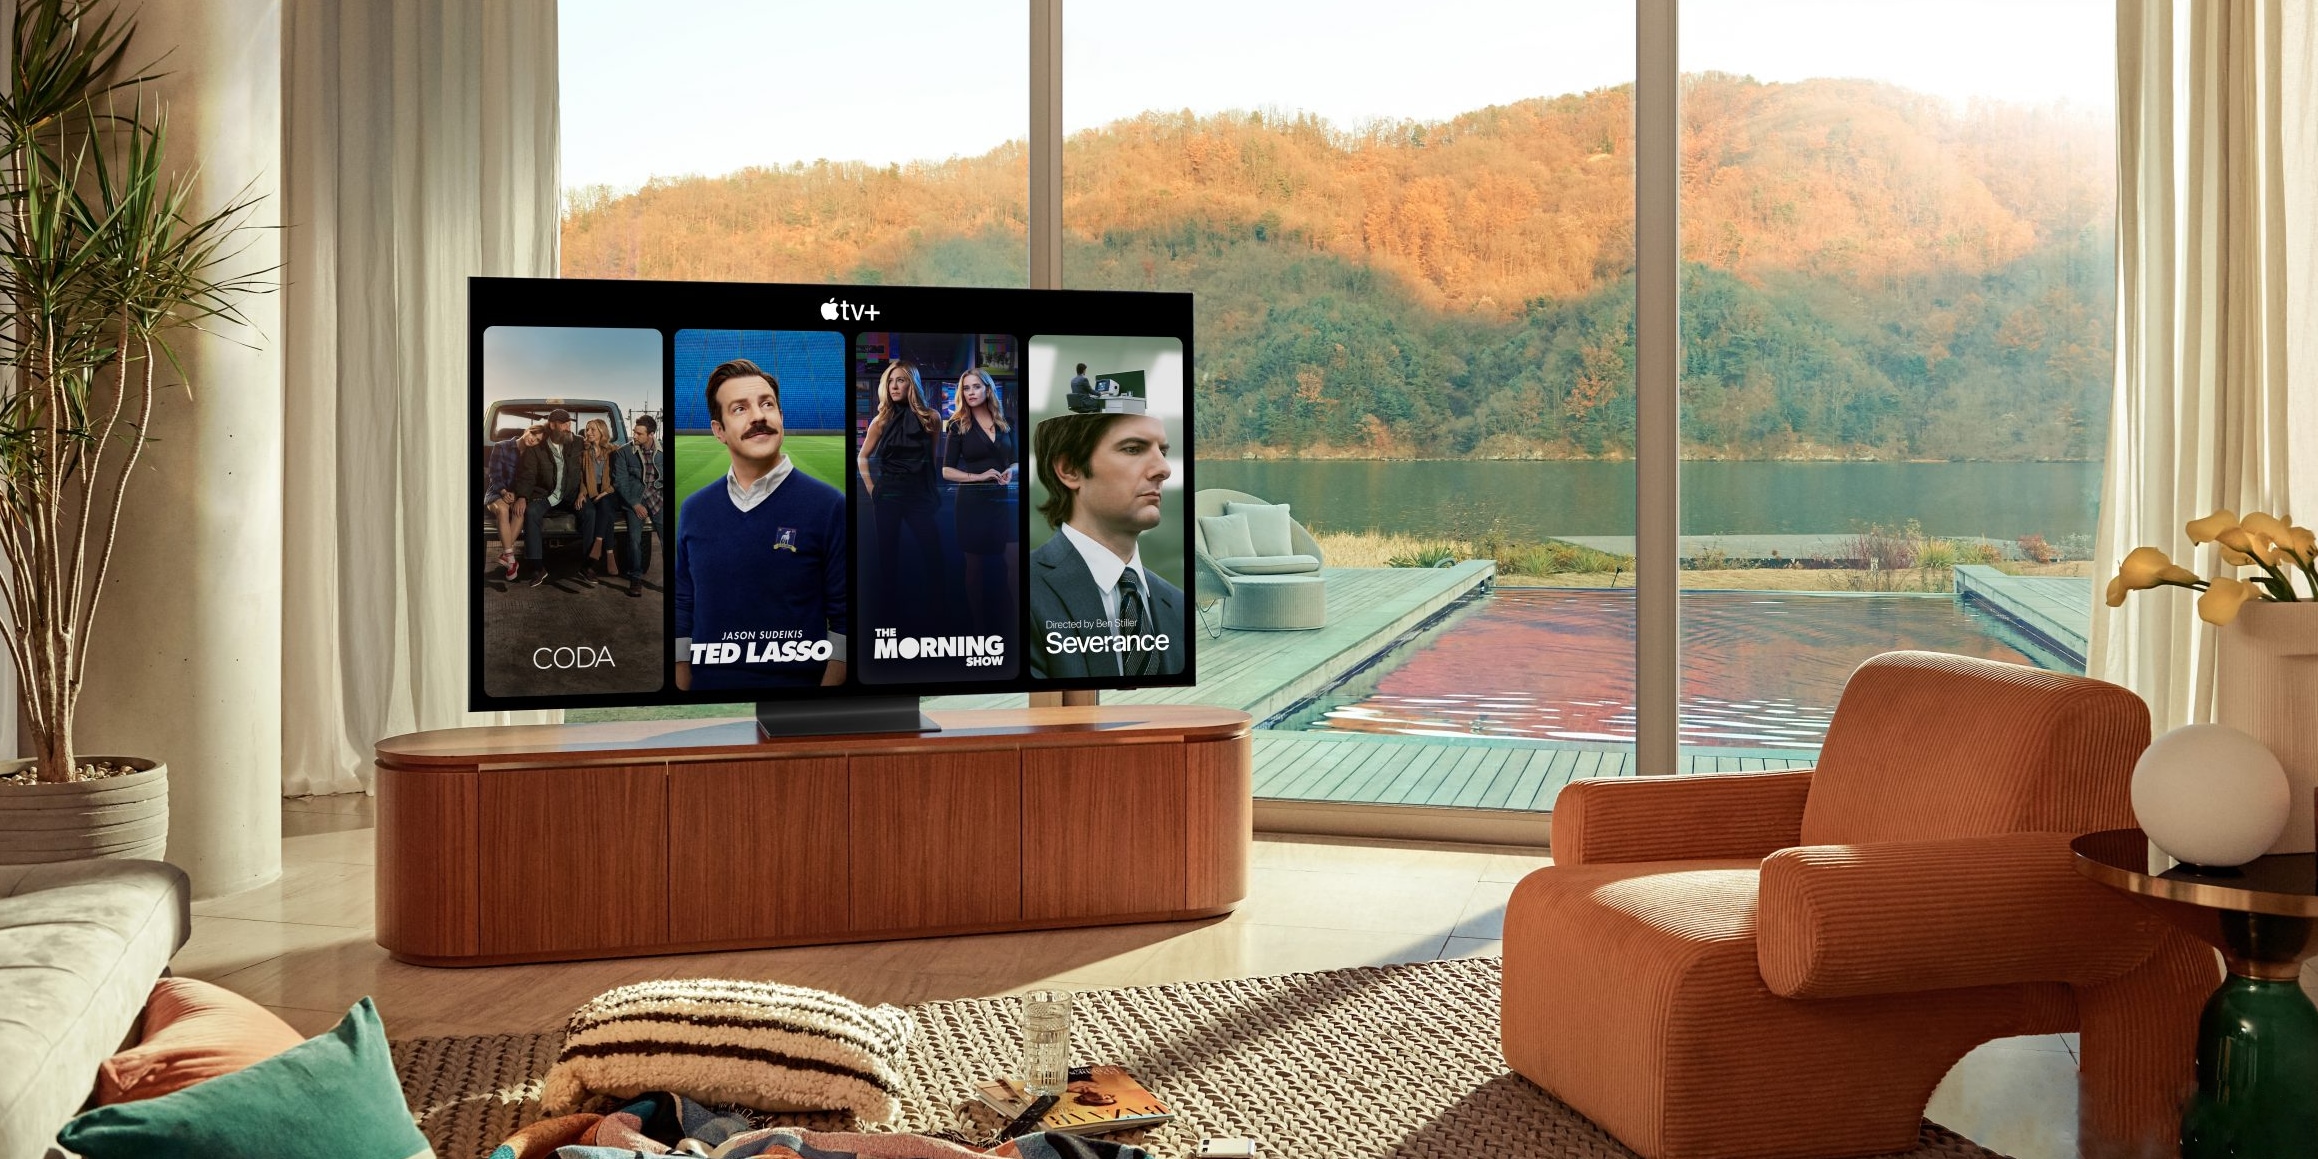 Samsung TV owners get free months Apple TV+